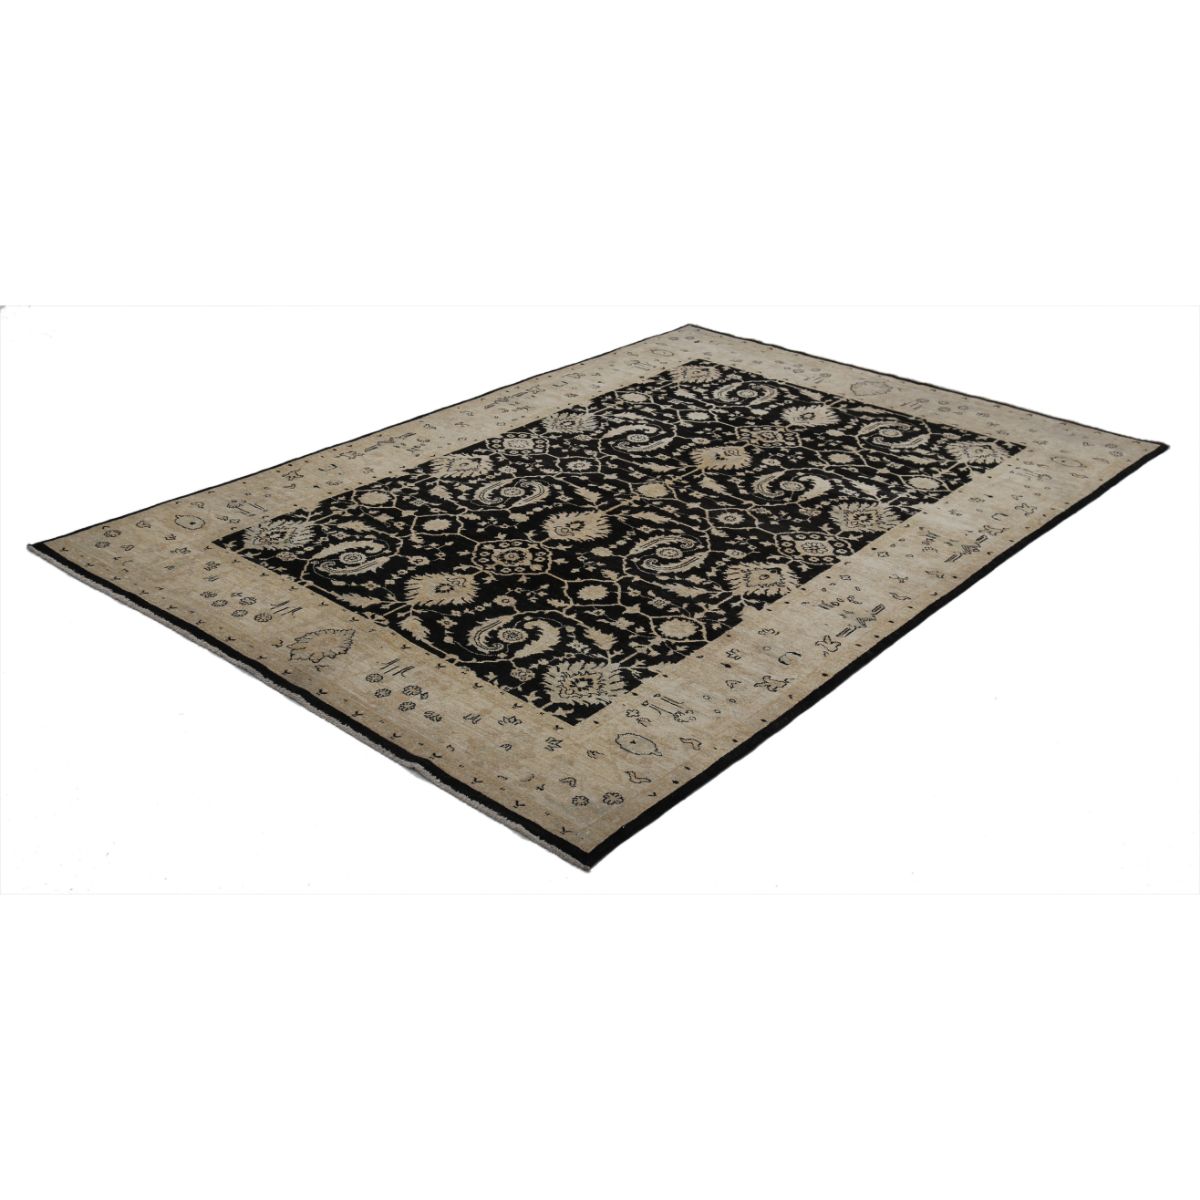 Ziegler 6'0" X 8'10" Wool Hand-Knotted Rug